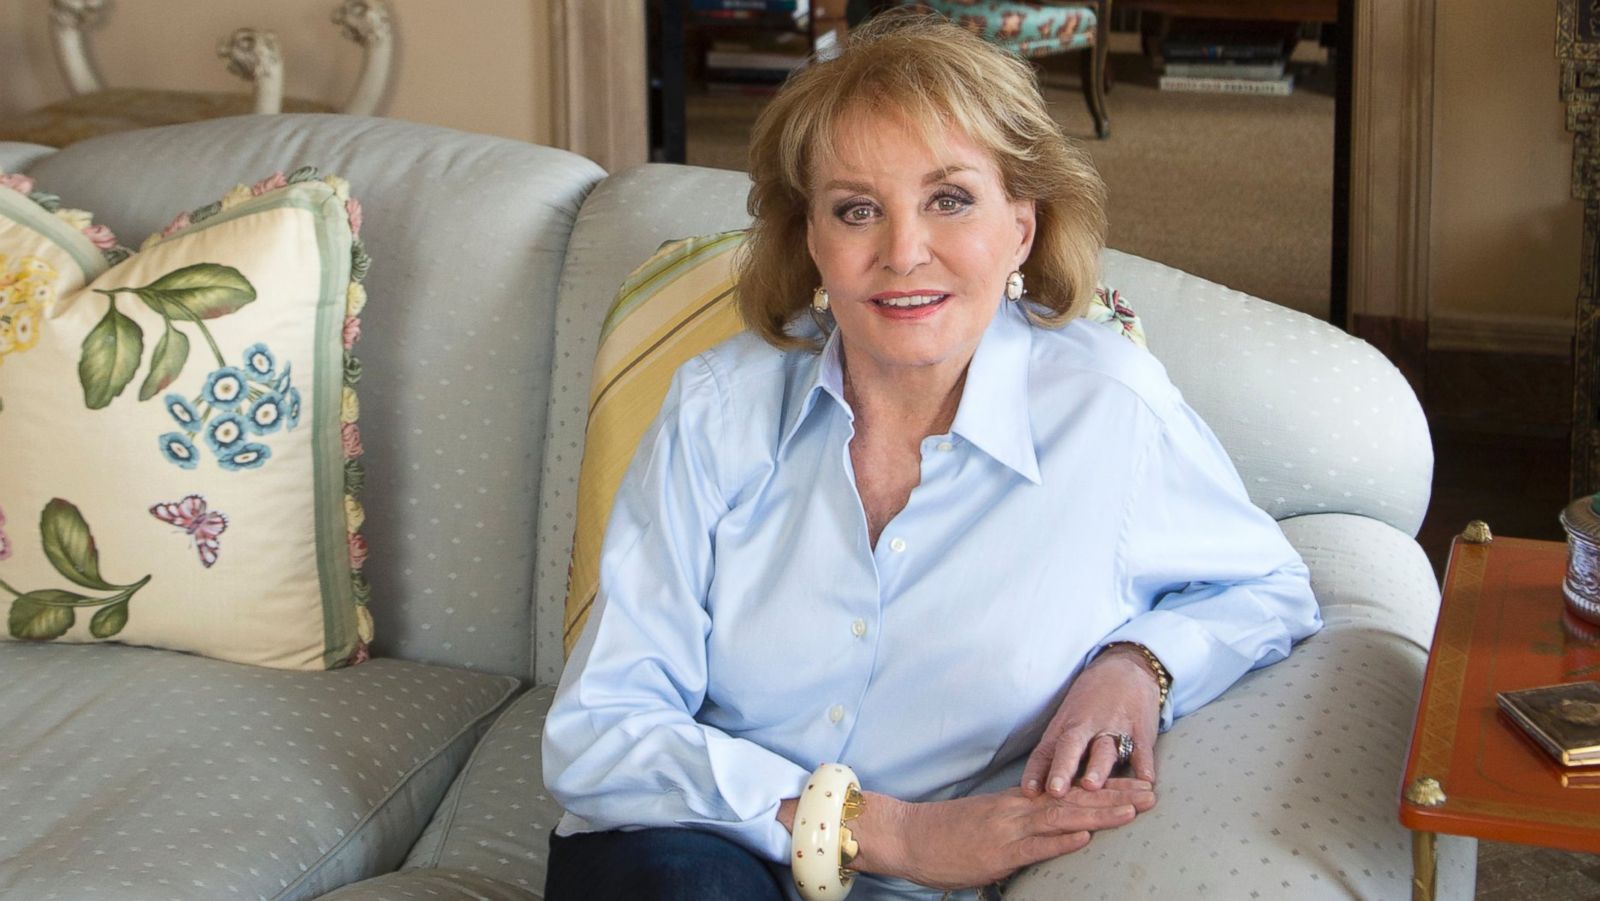 Barbara walters shares one of her biggest regrets